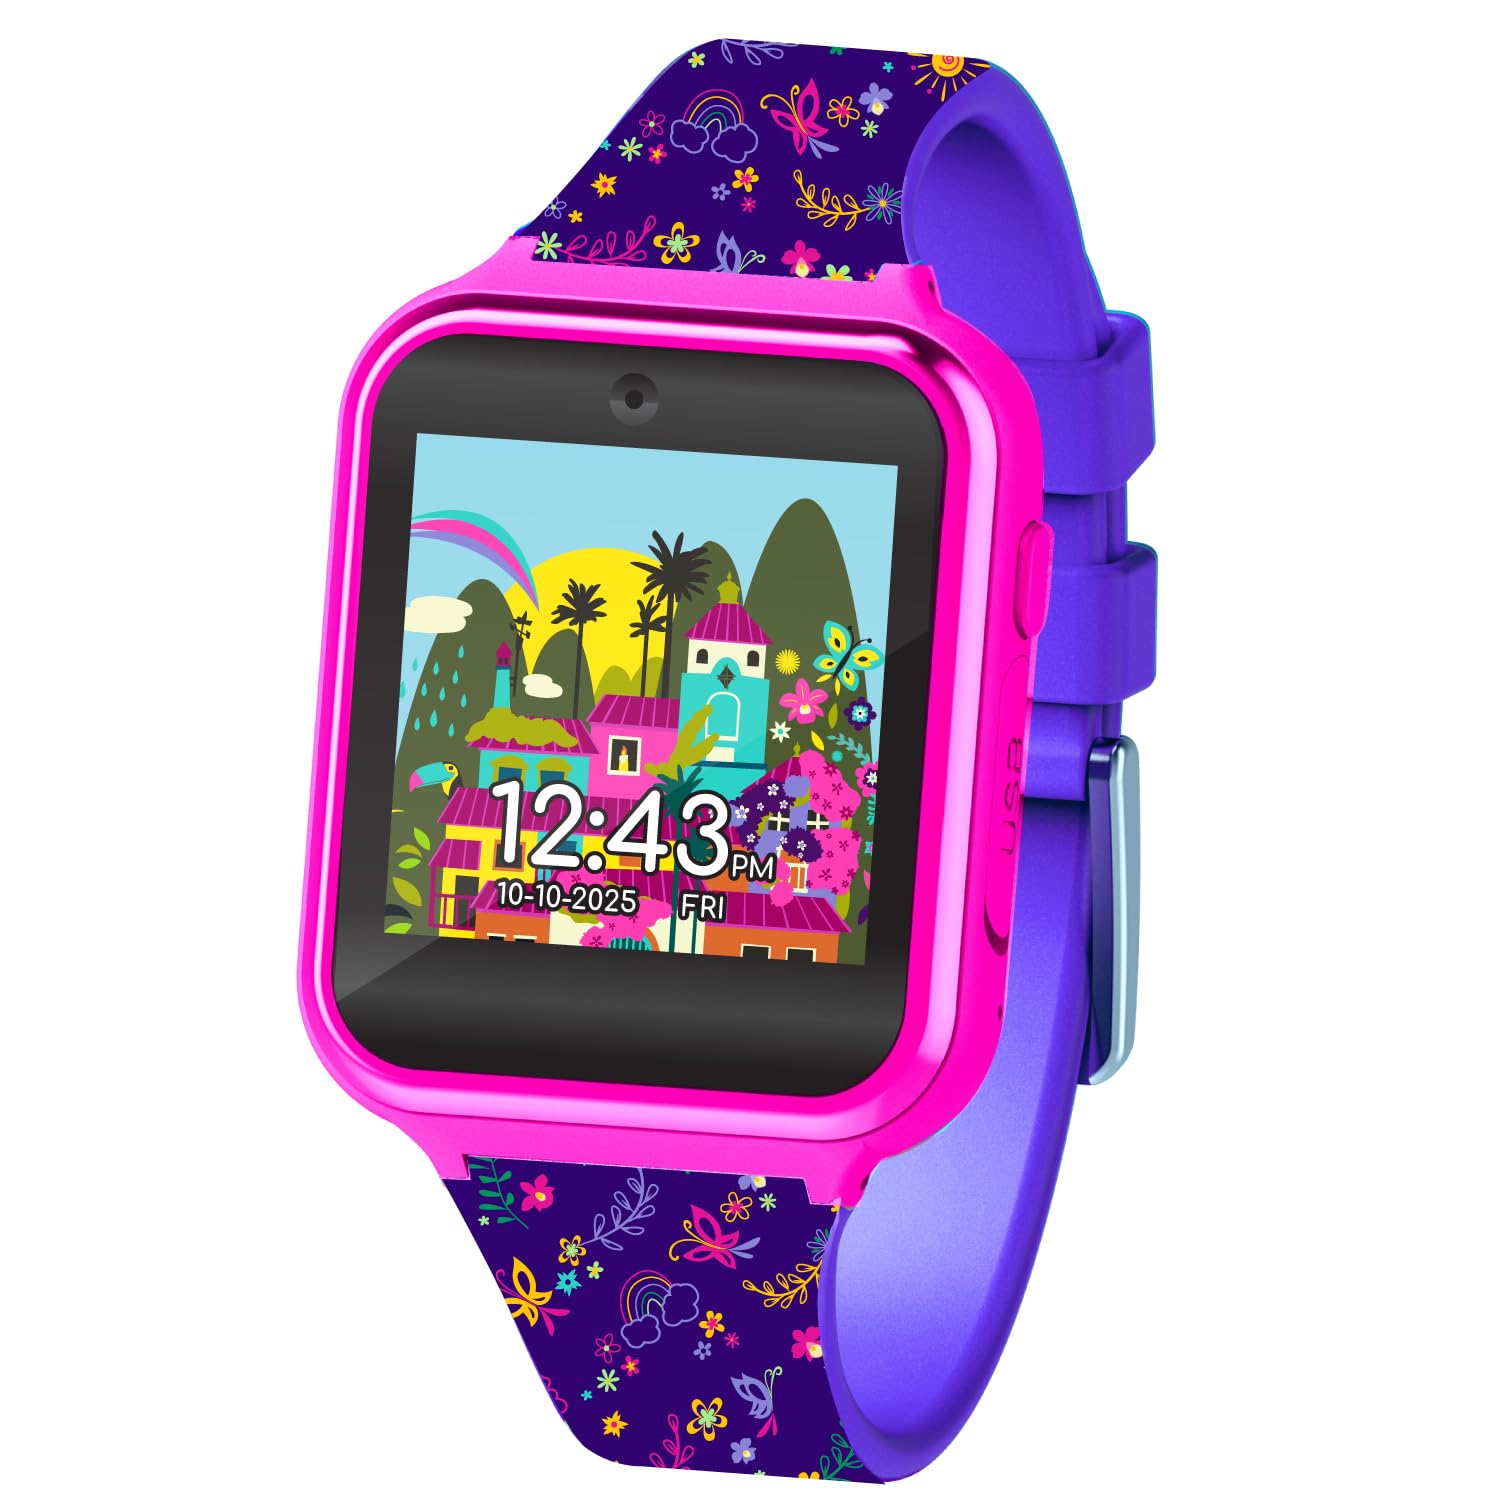 Accutime Encanto Educational Learning Touchscreen Kids Smartwatch - Multicolor Strap - Toy - Girls Boys Toddlers - Selfie C